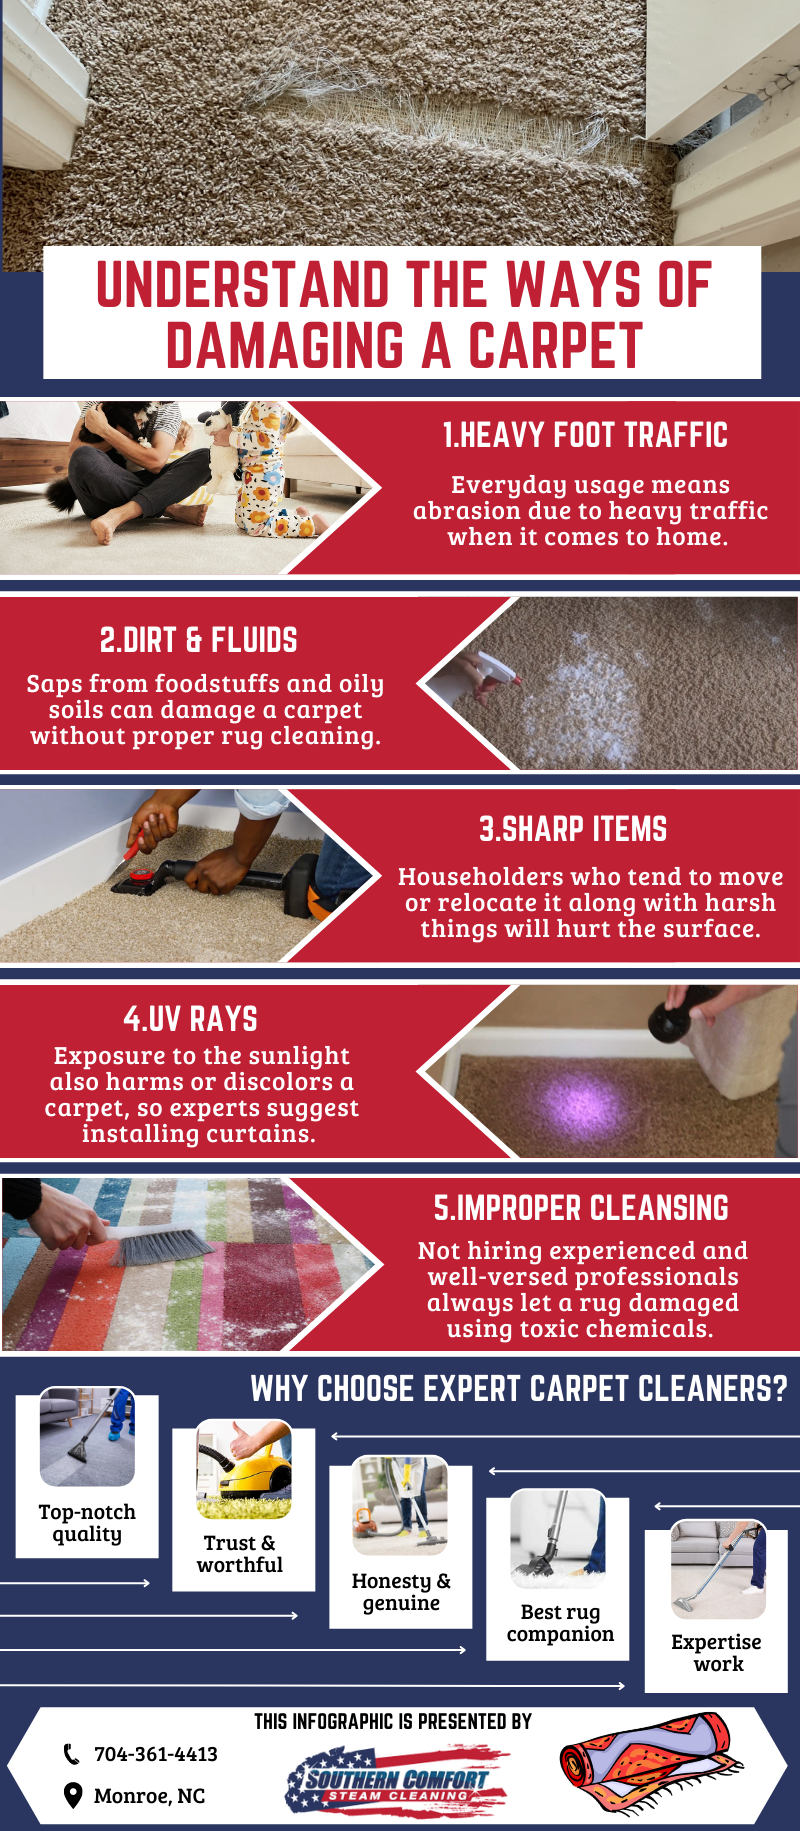 Excellent Protection for Your Carpet